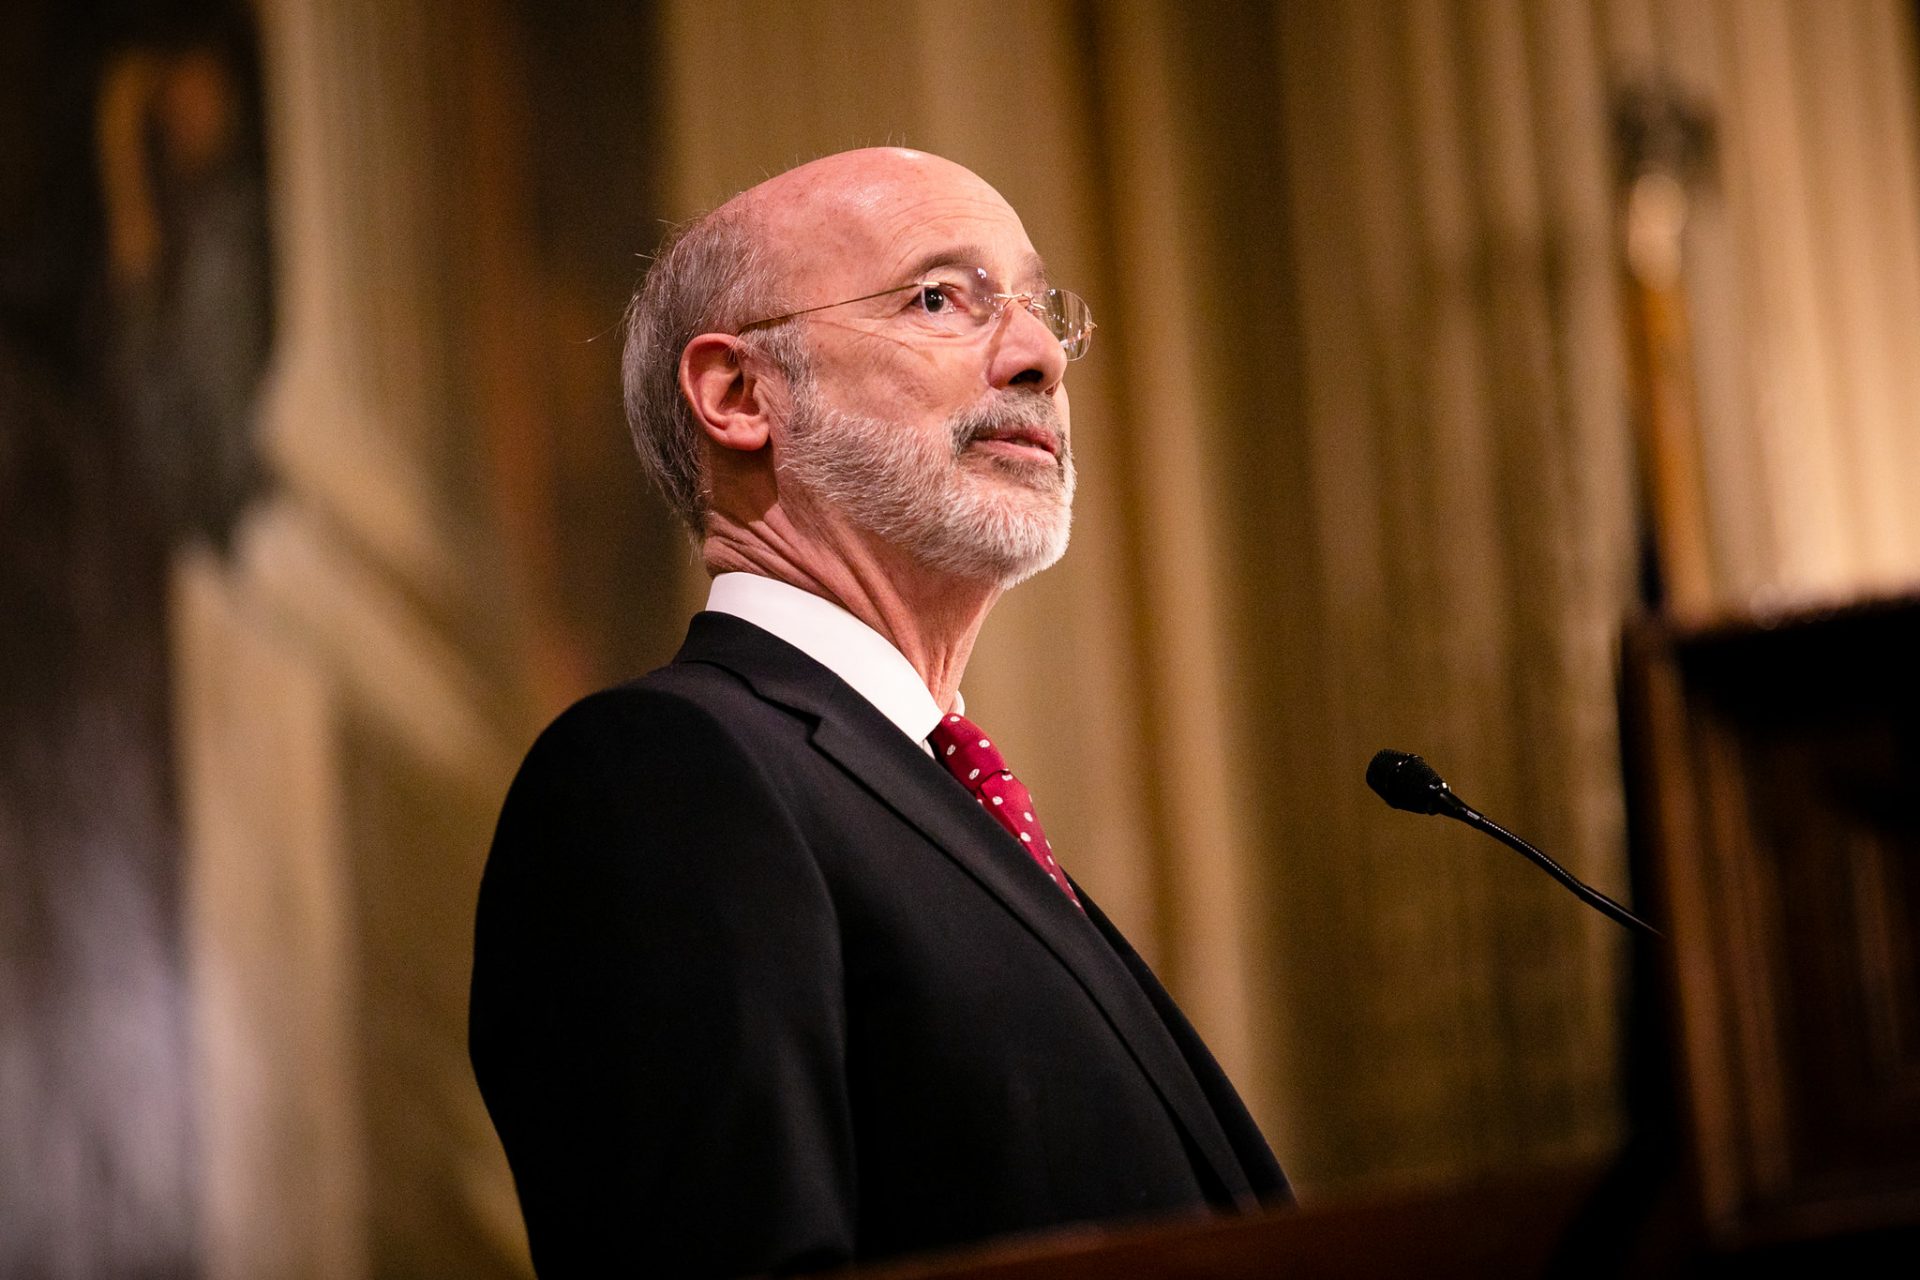 Governor Tom Wolf delivers his 2020-21 budget address in Harrisburg on Tuesday, February 4, 2019.